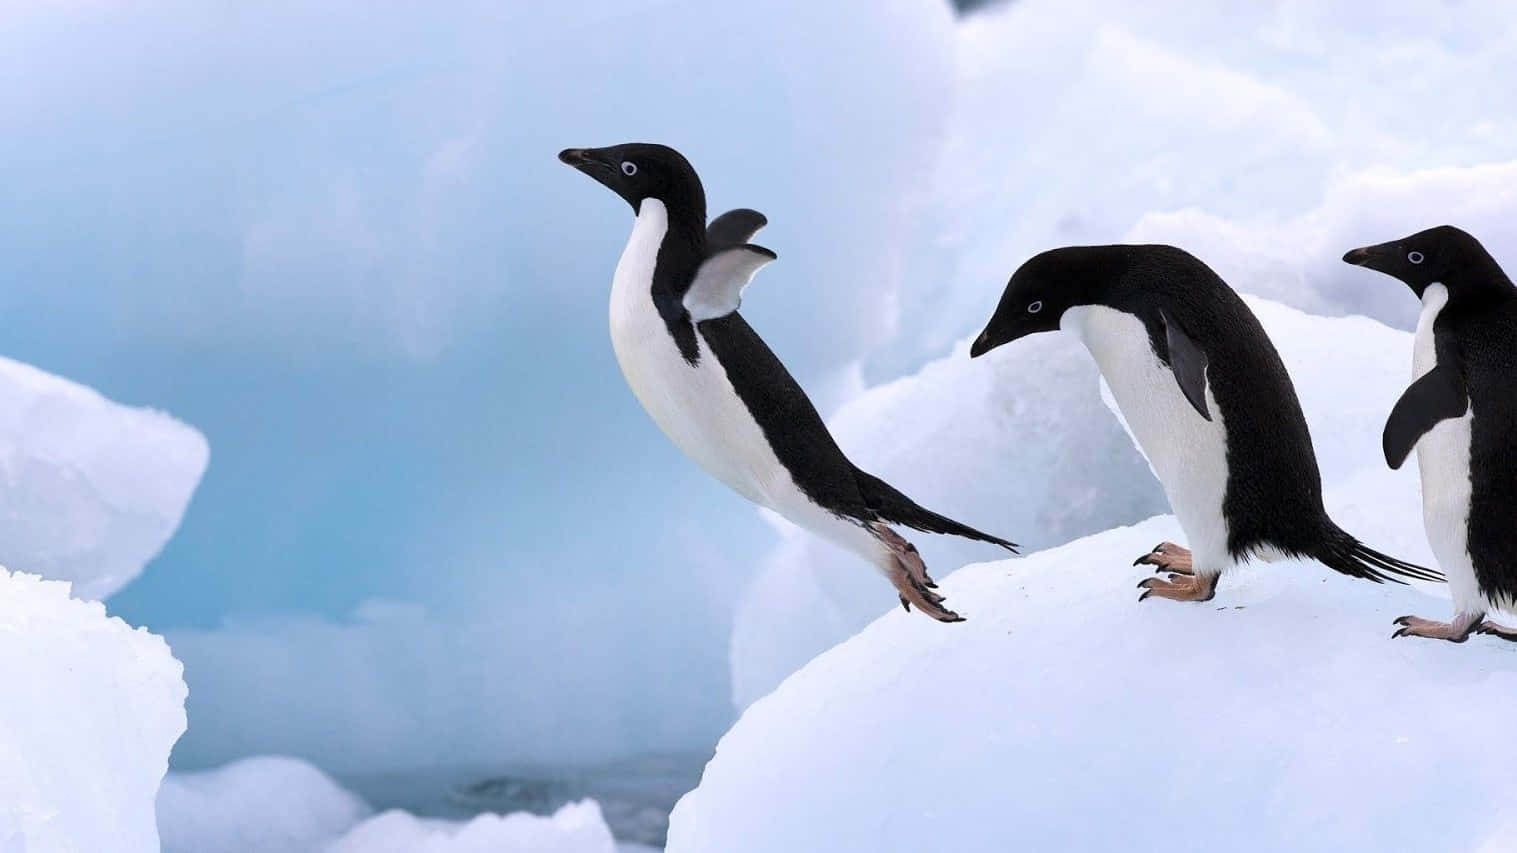 "Explore the Antarctic with this Adorable Baby Penguin"